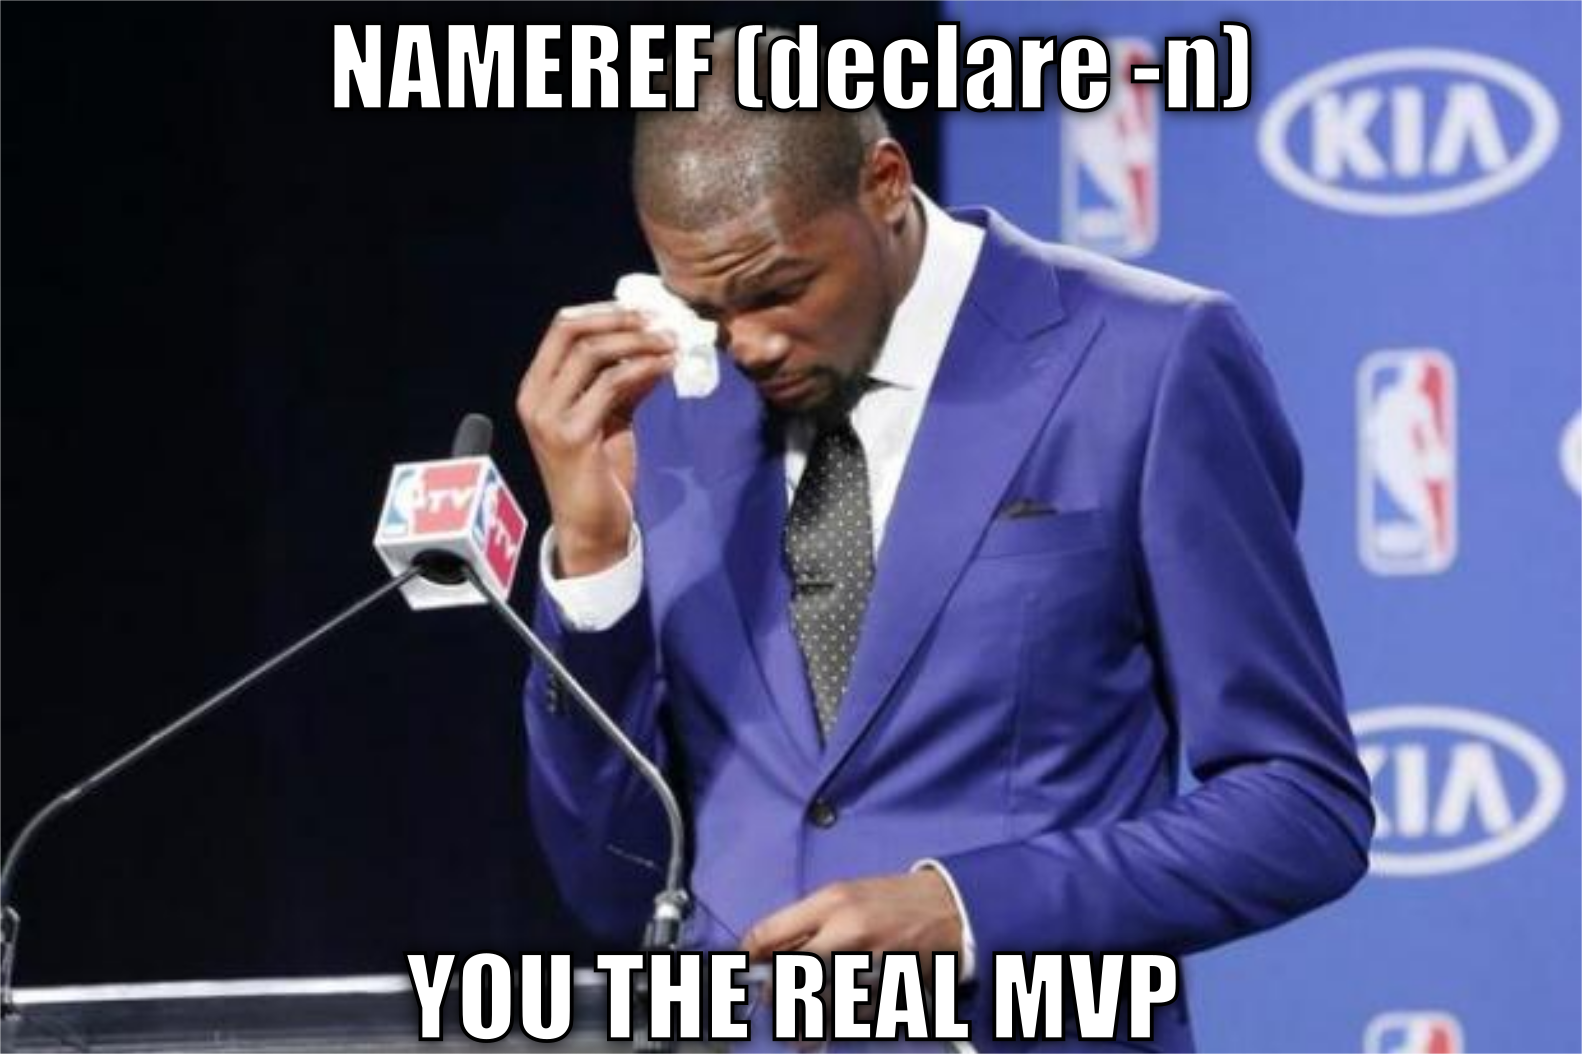 Nameref (declare -n), You the real MVP.